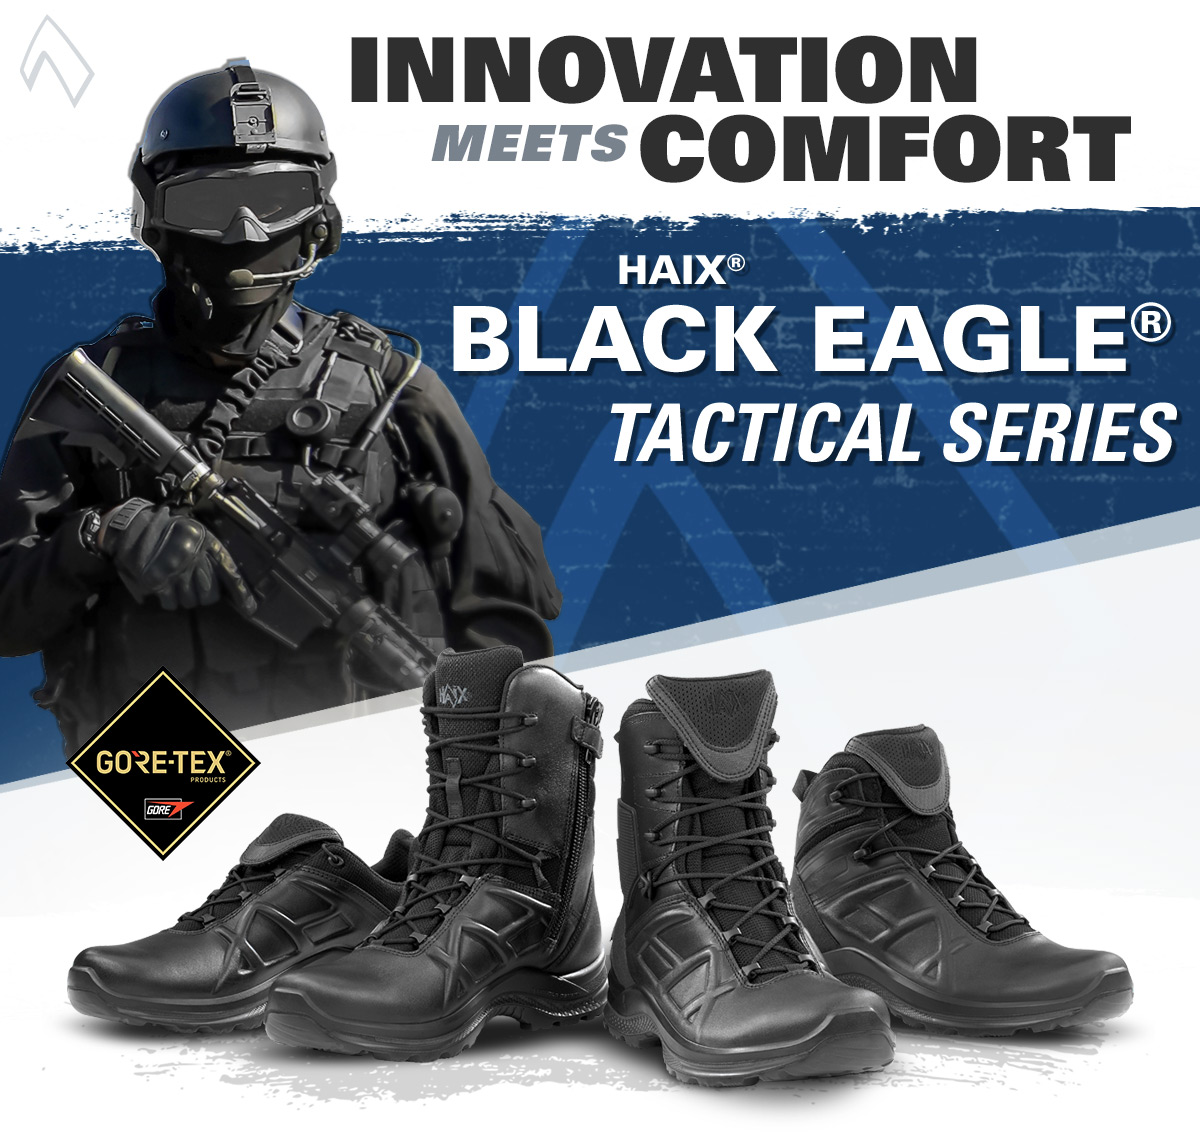 Tactical Law Enforcement Boots for Reliable Performance